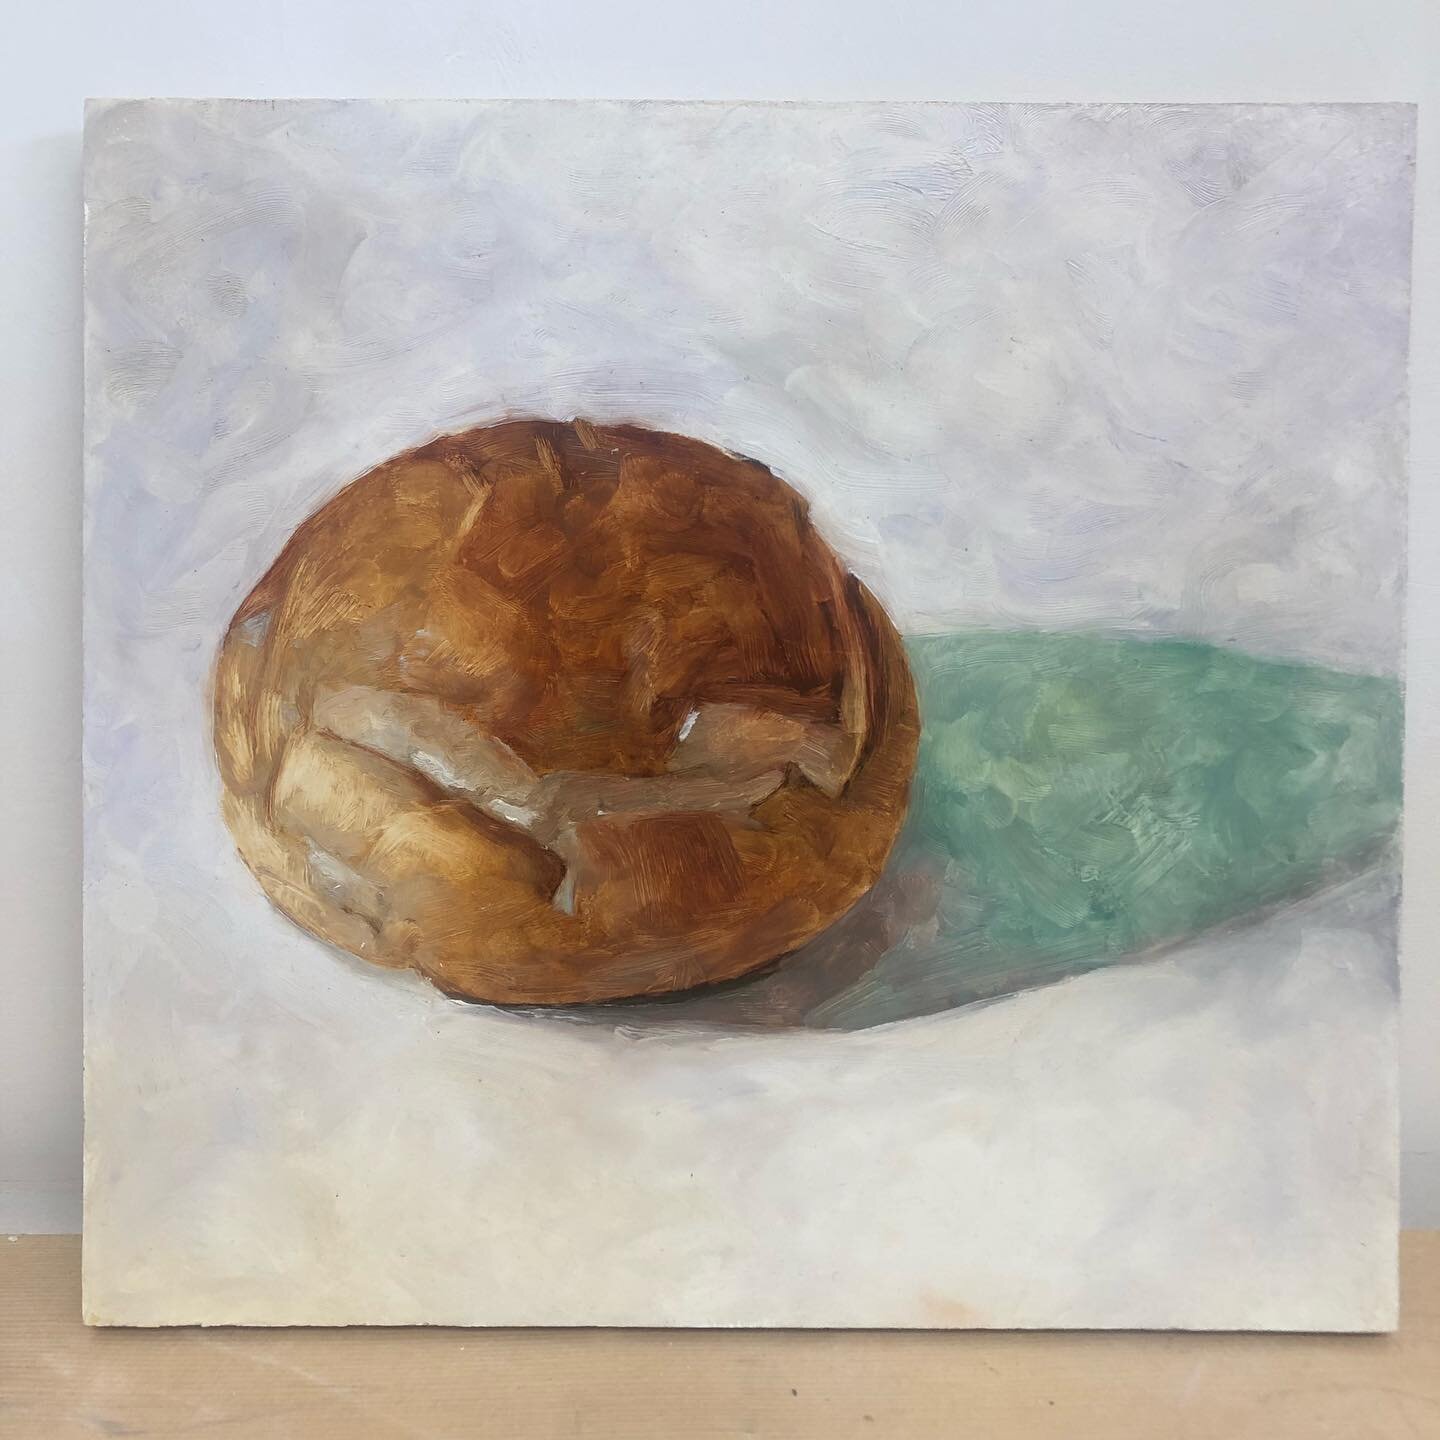 This loaf is one of my favorites from a still life series I did early on. I painted it from life. I put the bread on top of a white board&hellip;which I now realize it&rsquo;s exactly what I&rsquo;m doing in the flower paintings. 🤦🏼&zwj;♂️
It&rsquo